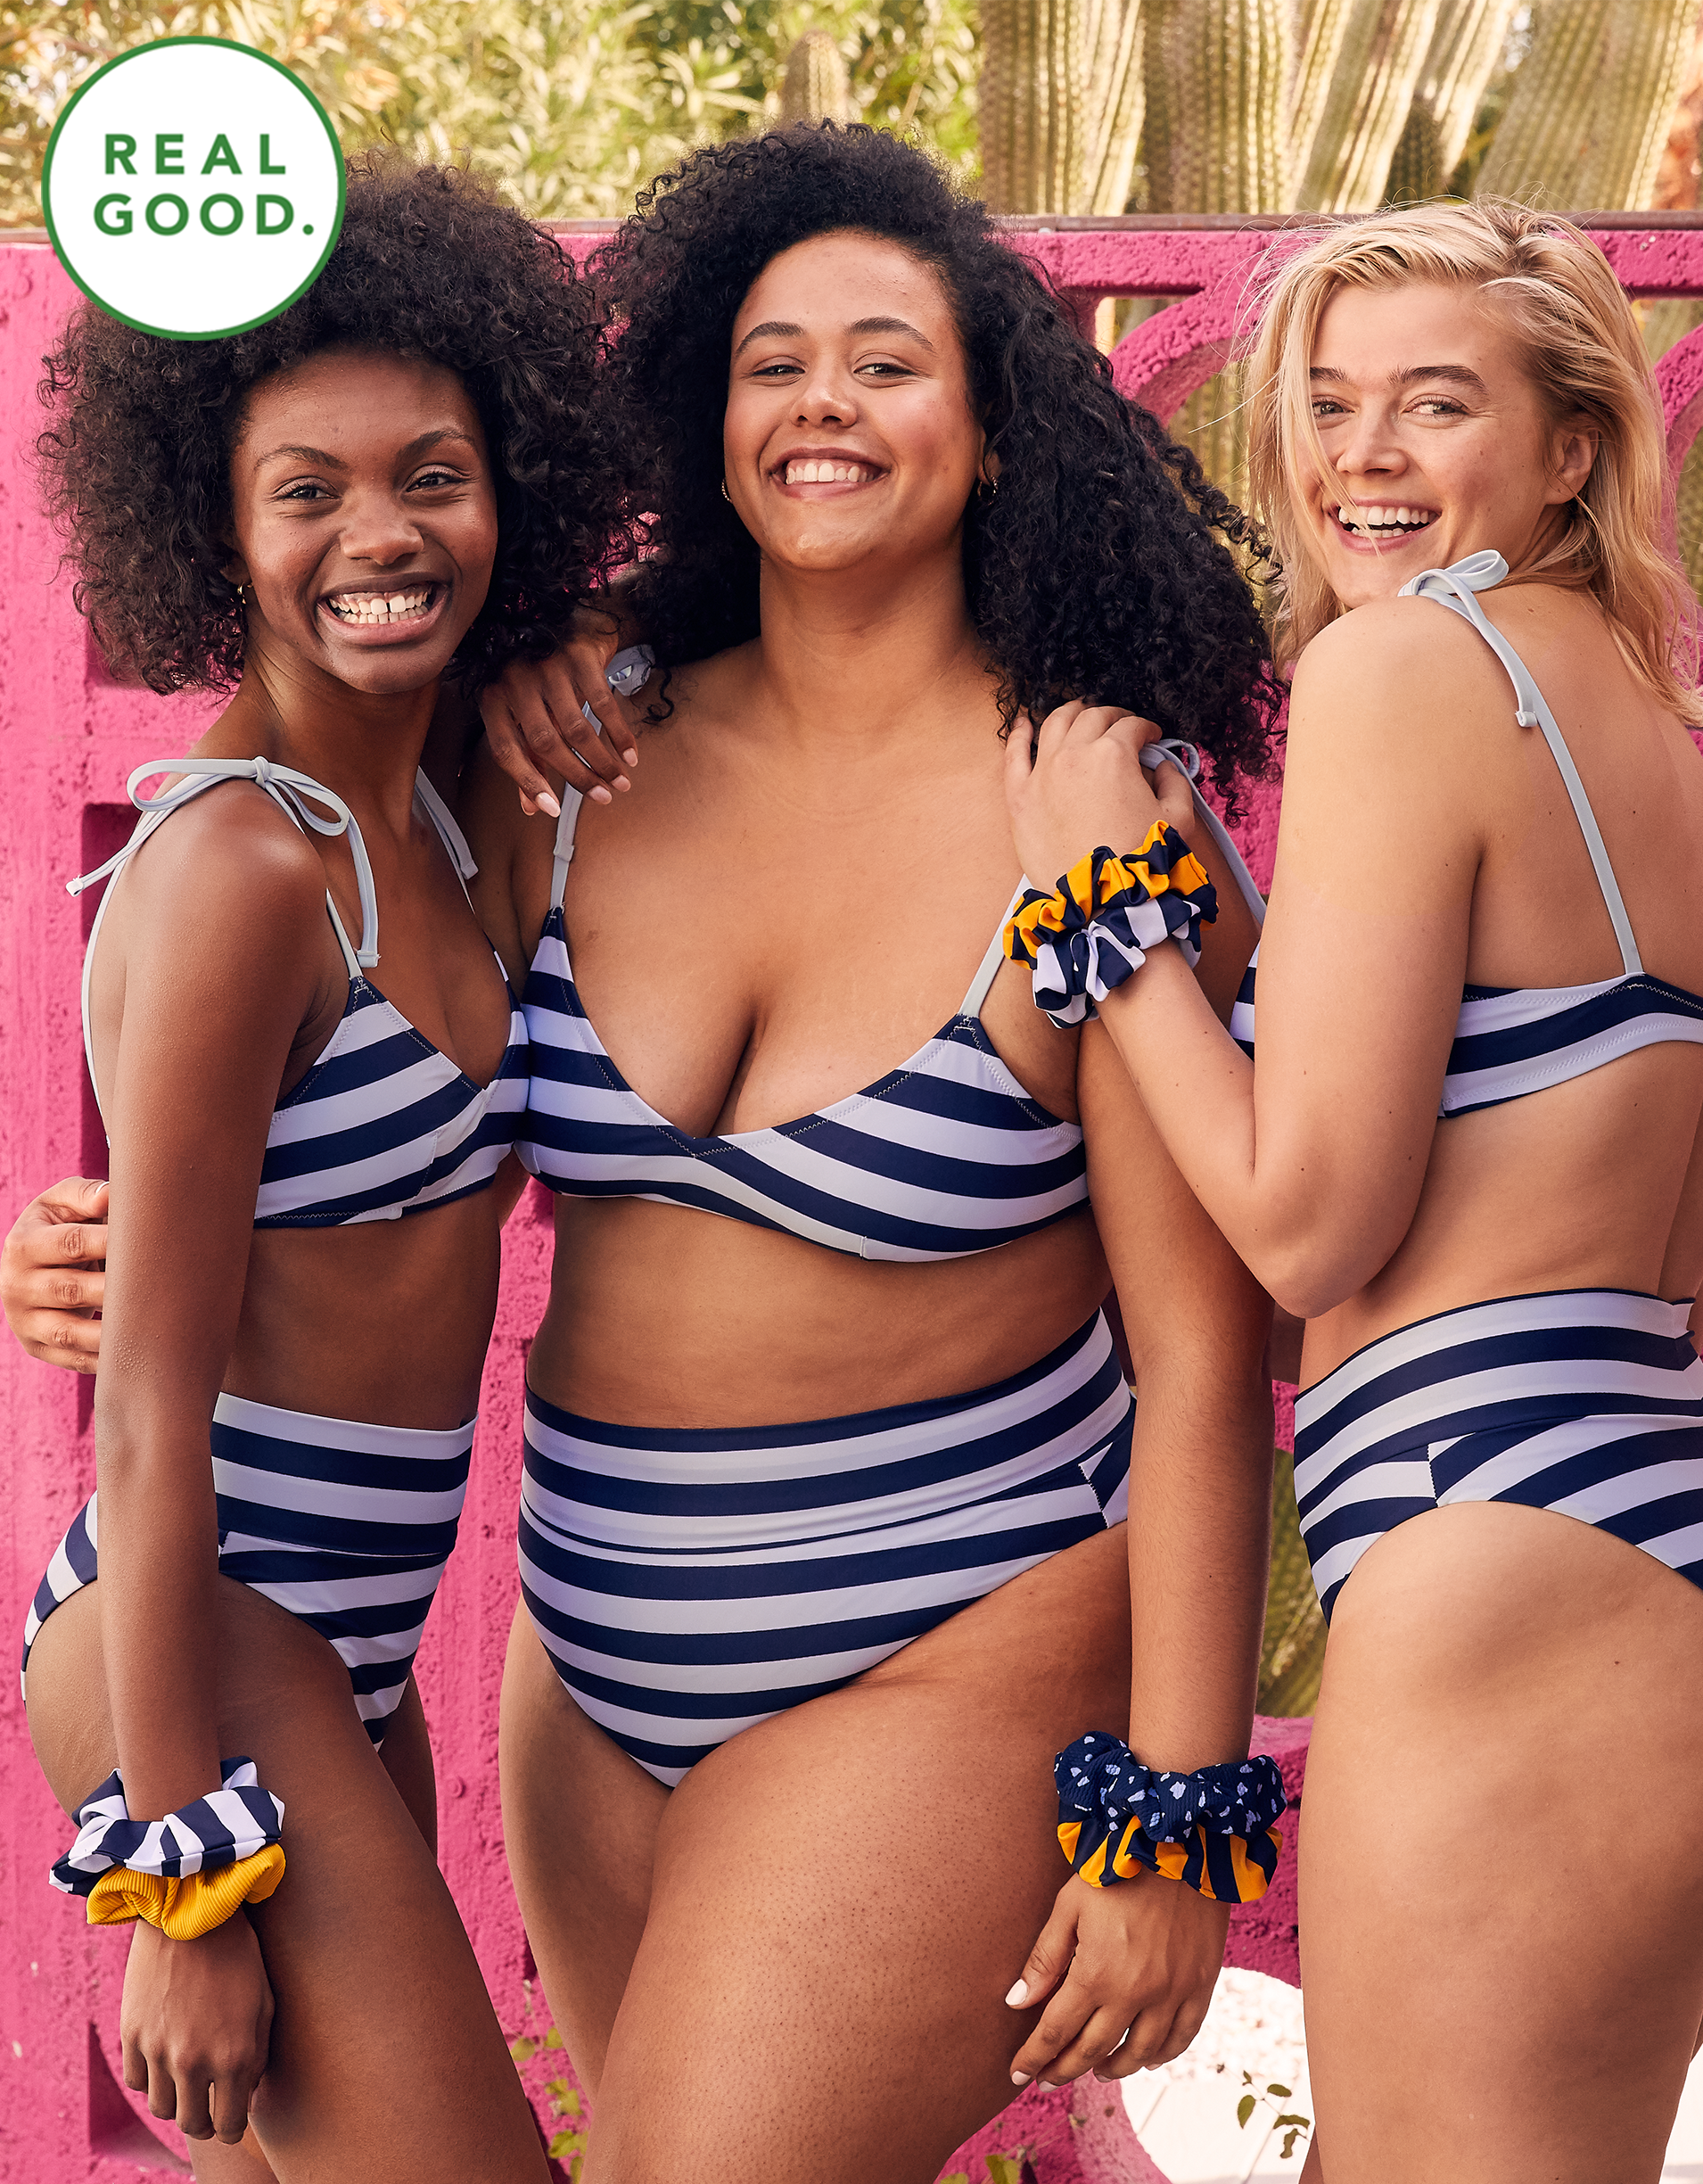 Real Good™ Sustainable Swimwear from Aerie - Decadent Dissonance